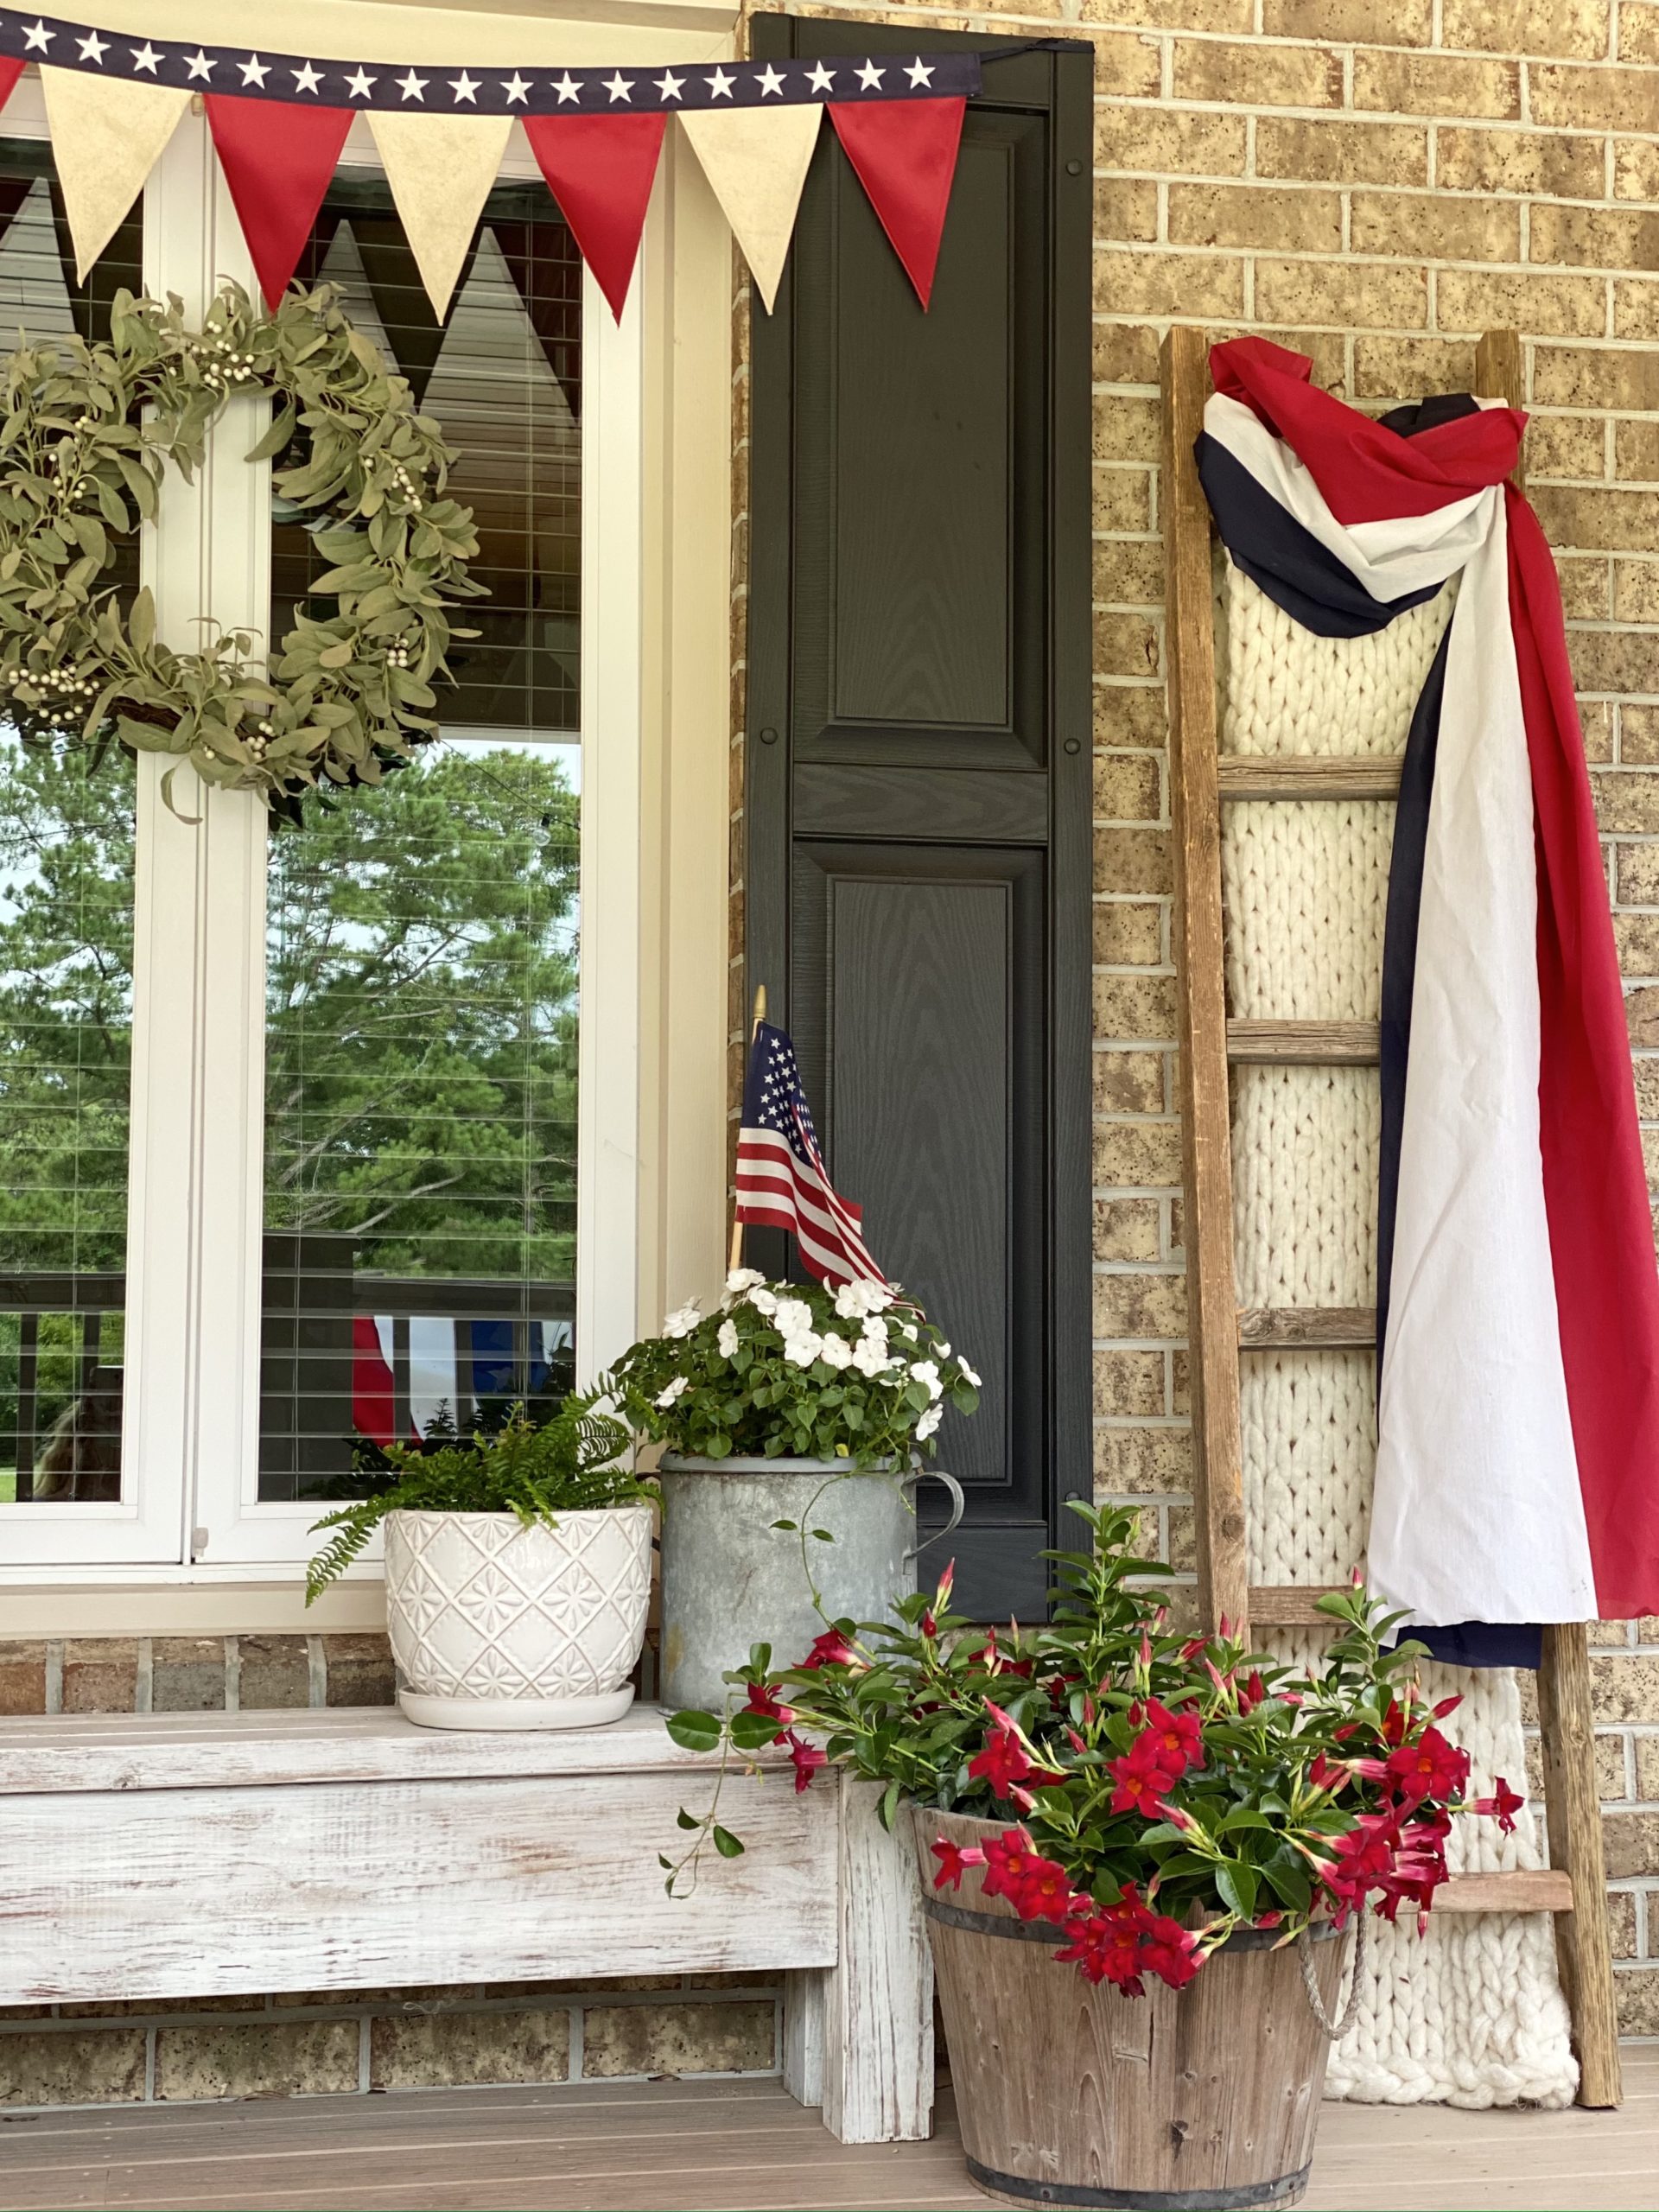 Blanket ladder draped in red, white, and blue cloth.